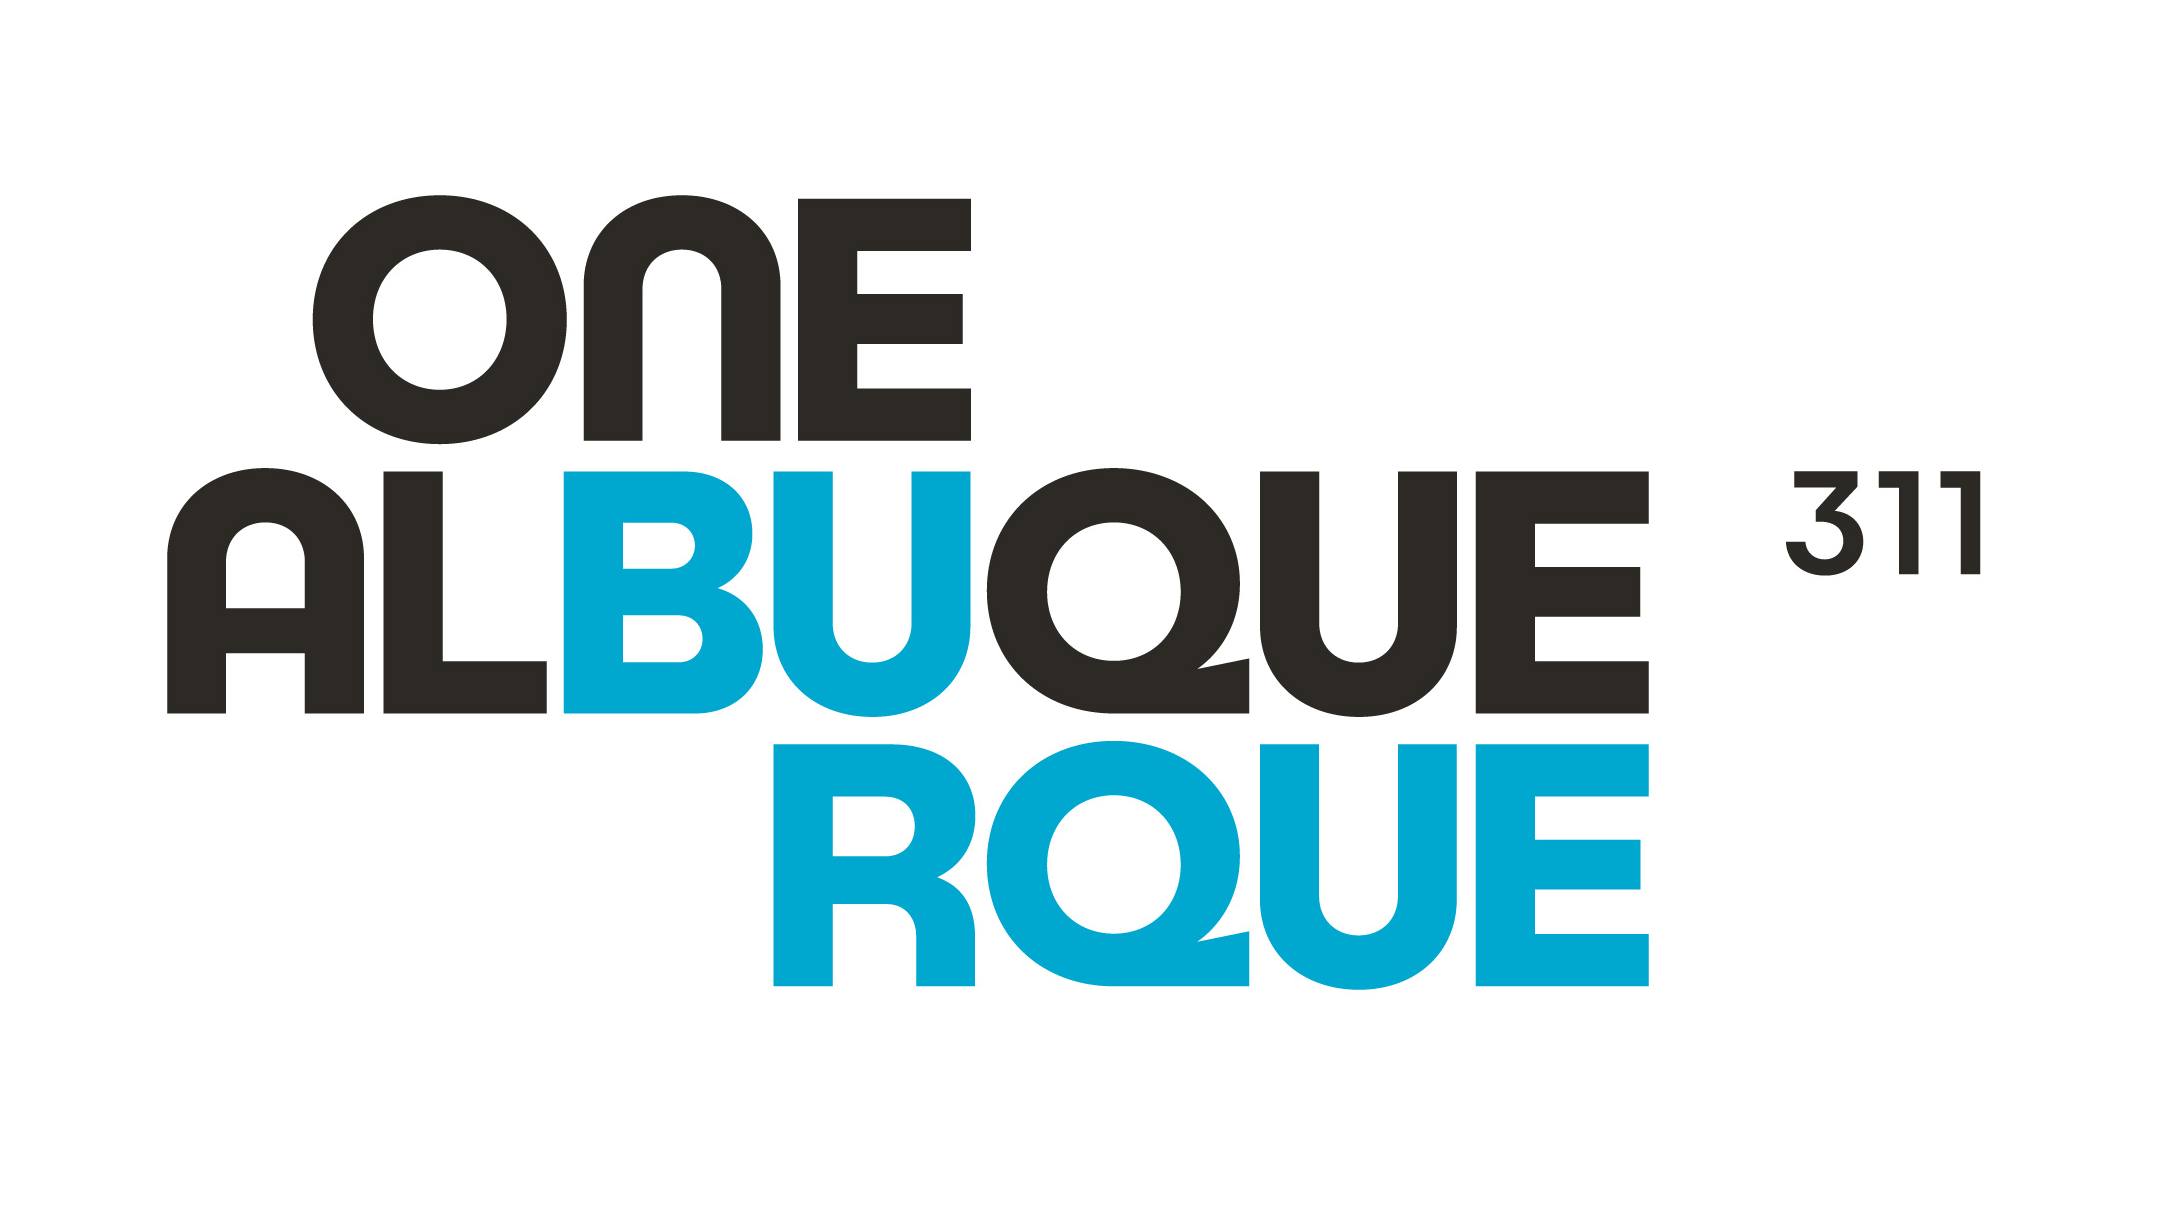 The One ABQ Logo in blue with the numbers 311 to the right.